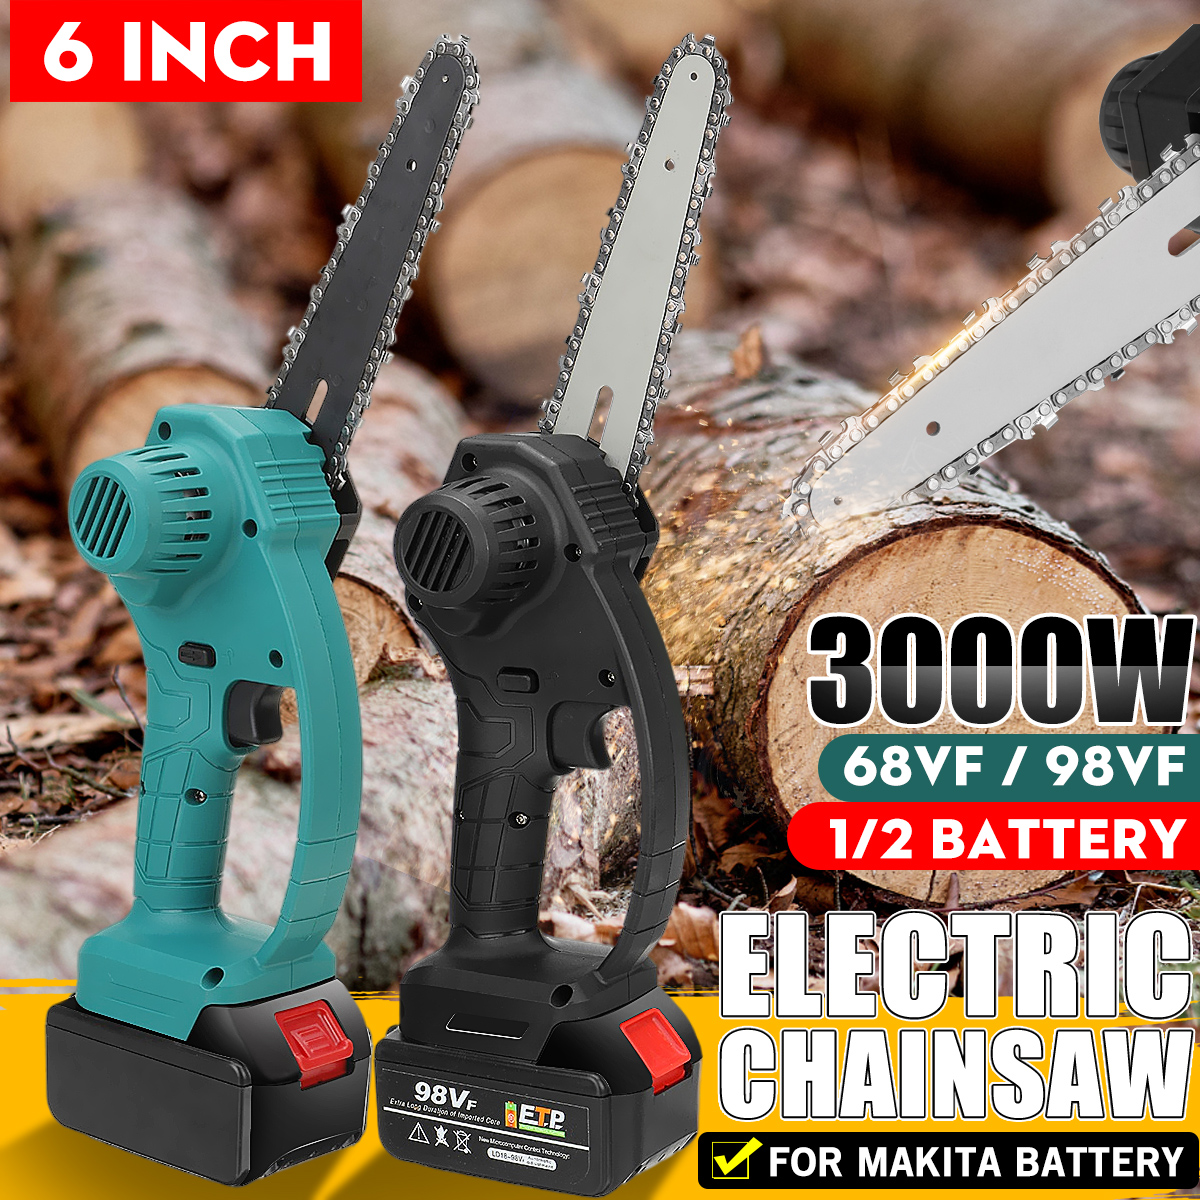 6-Inch-Cordless-Electric-Mini-Chainsaw-Rechargeable-Wood-Cutter-Chain-Saw-Woodworking-Tool-W-12pcs-B-1849932-1